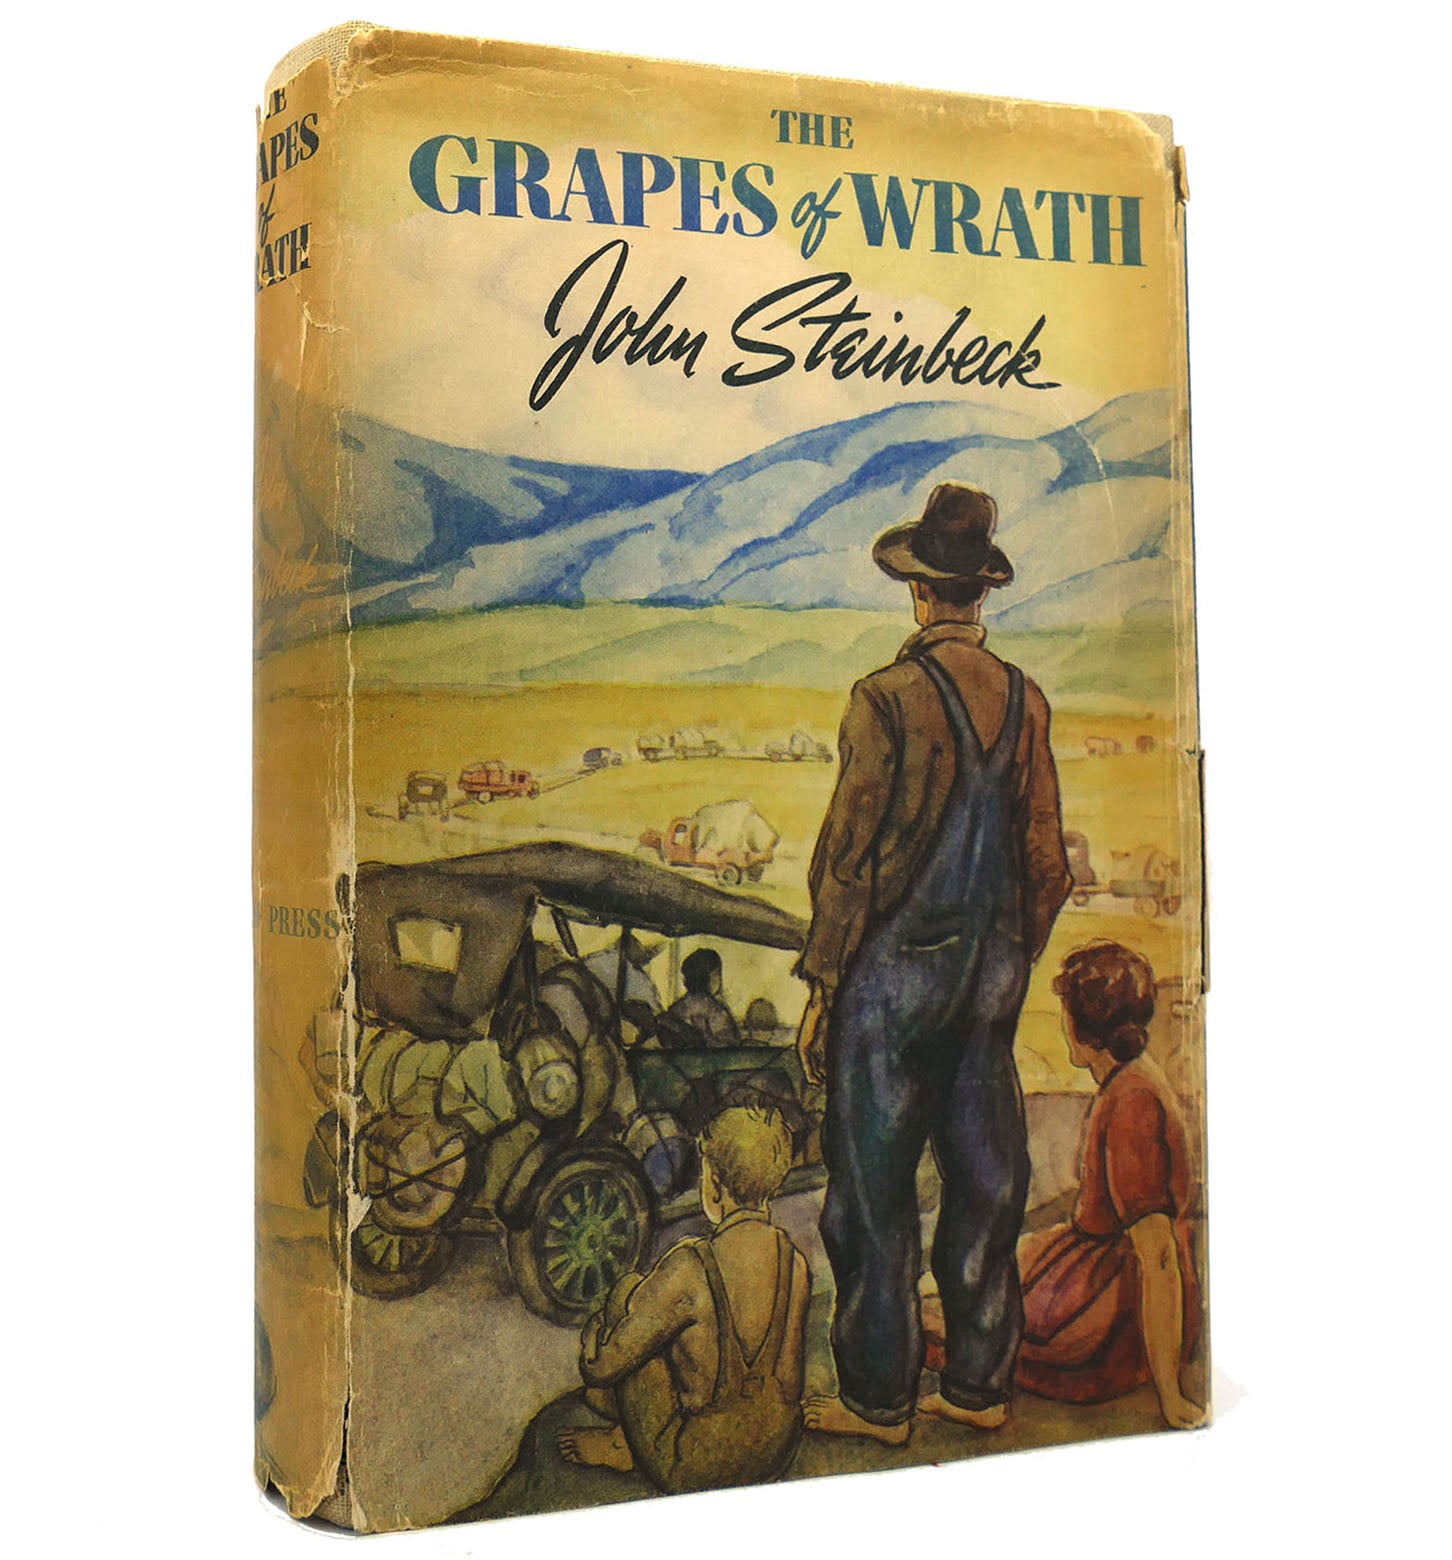 THE GRAPES OF WRATH Stated First Edition. John Steinbeck.